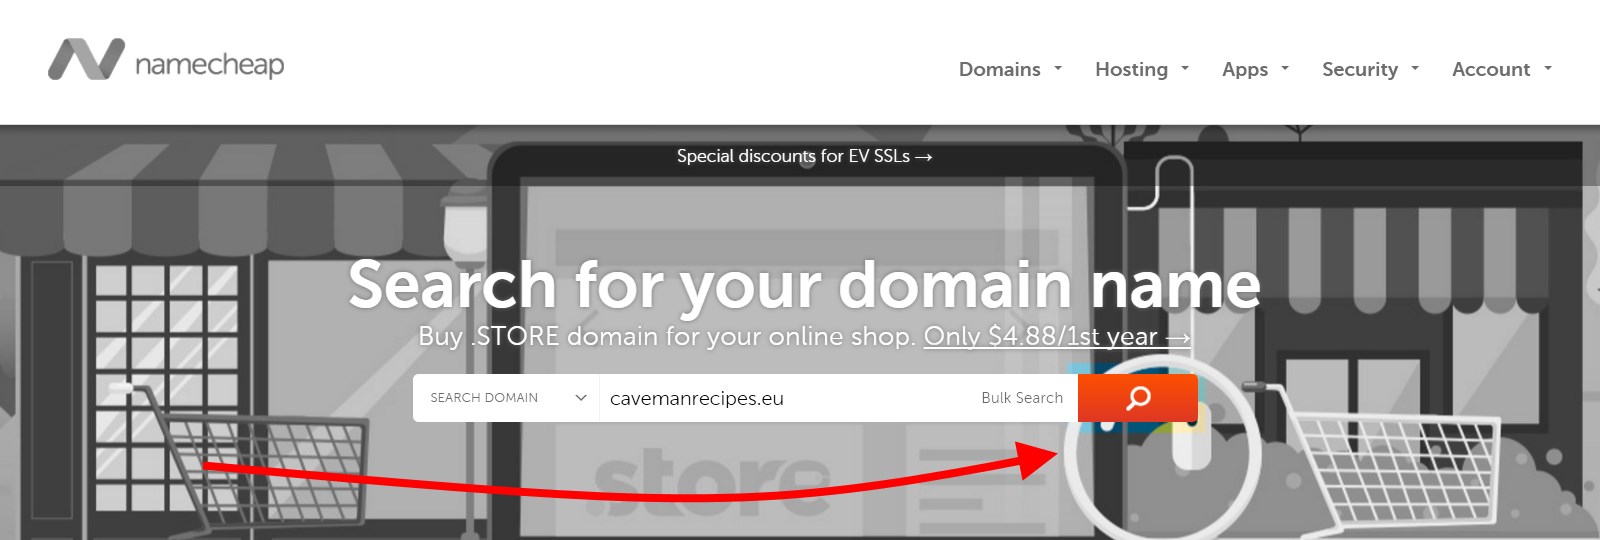 How can I register my own domain name?